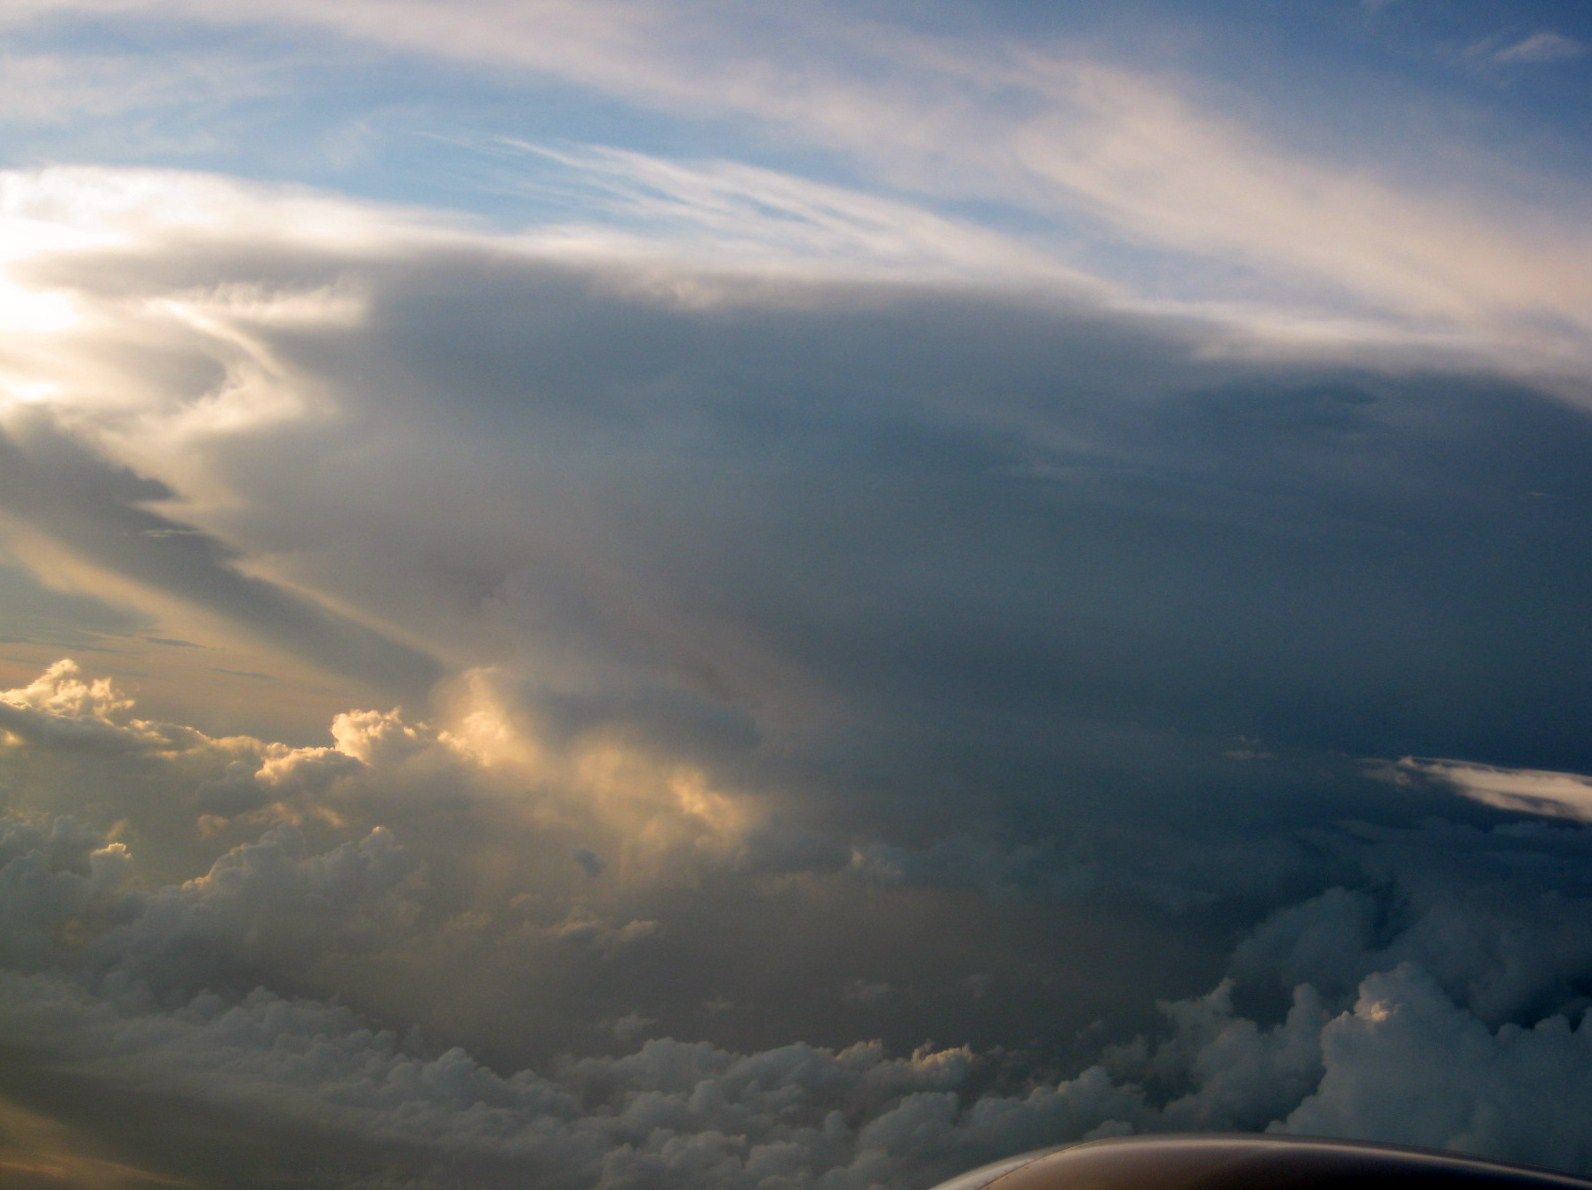 A thunderstorm, which would require circumnavigation, as seen from the air.